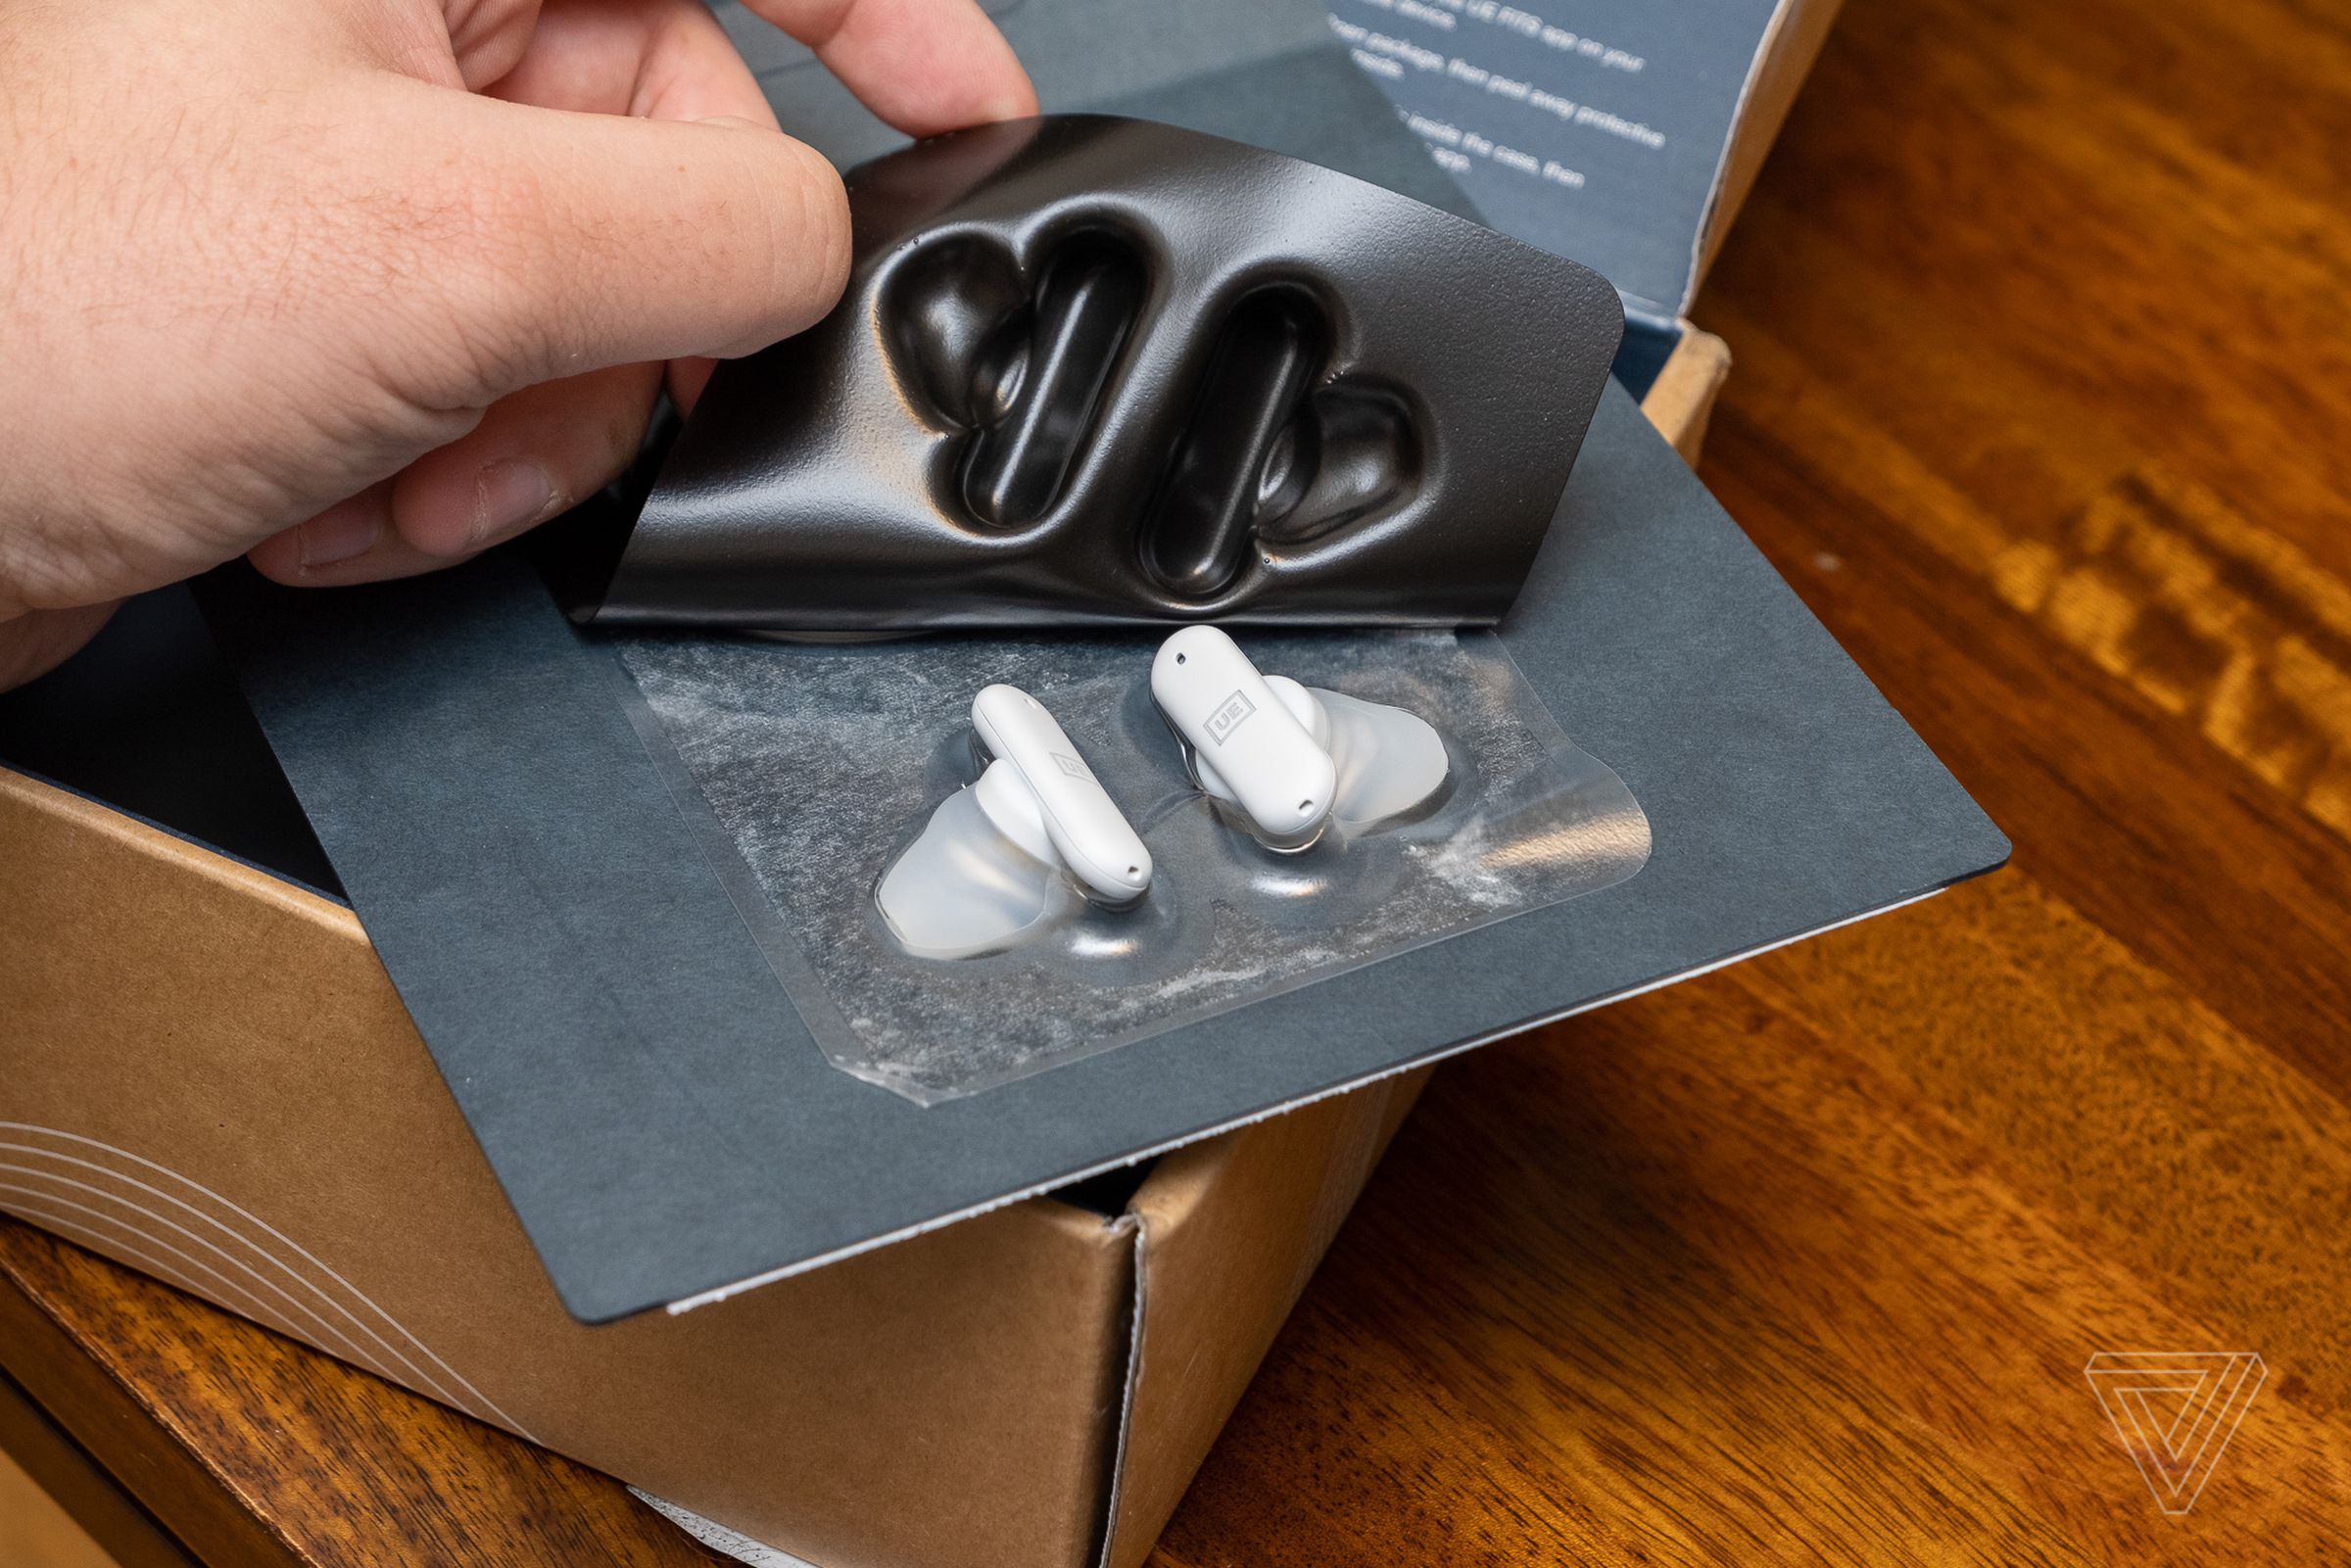 It’s not your typical earbuds unboxing experience.